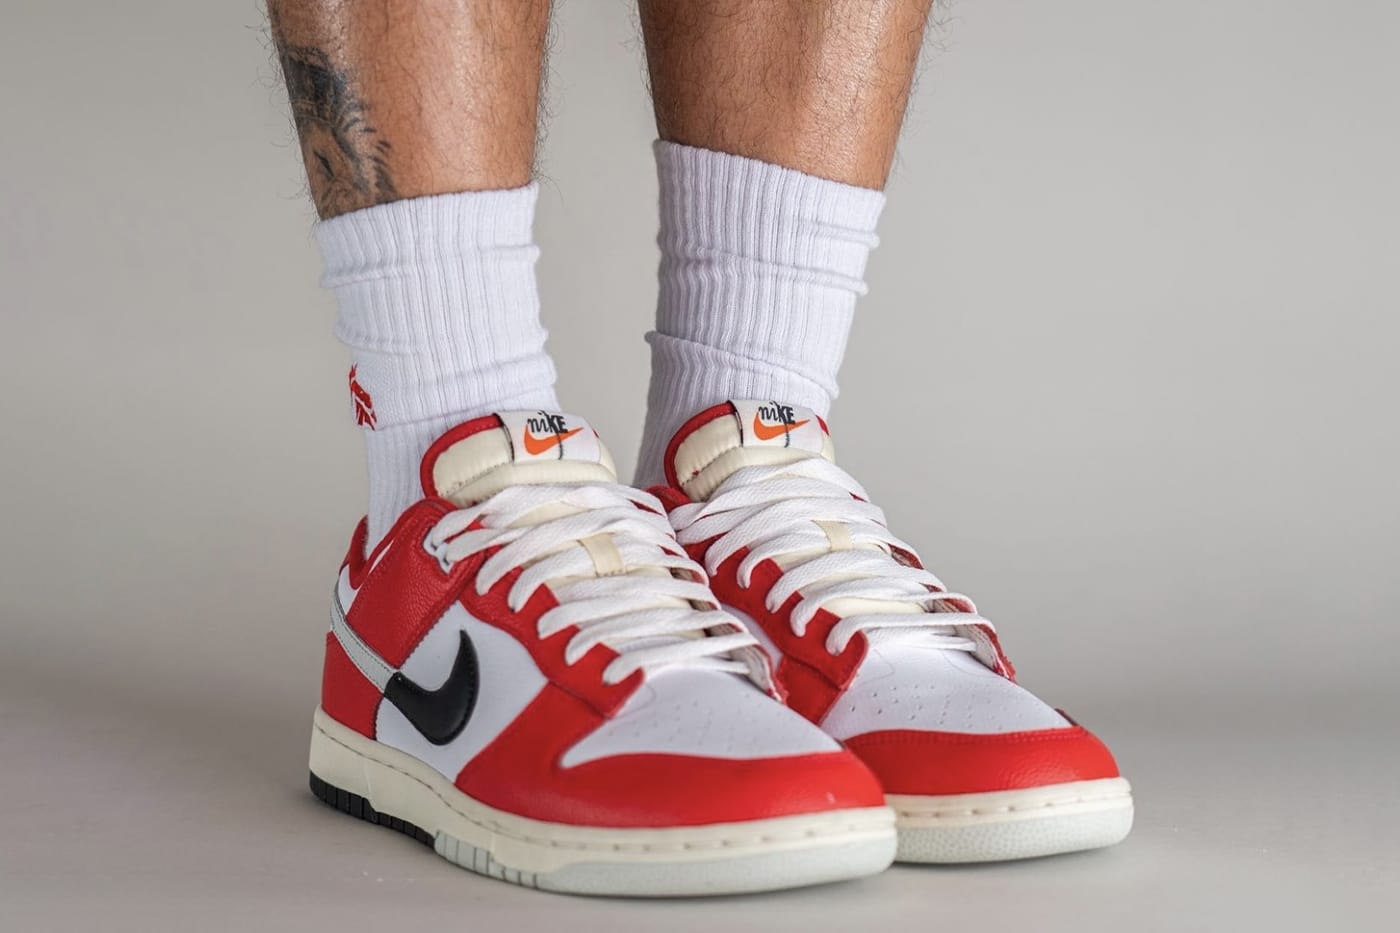 Nike Dunk Low “Chicago Split” On-Foot Photos | Hypebeast